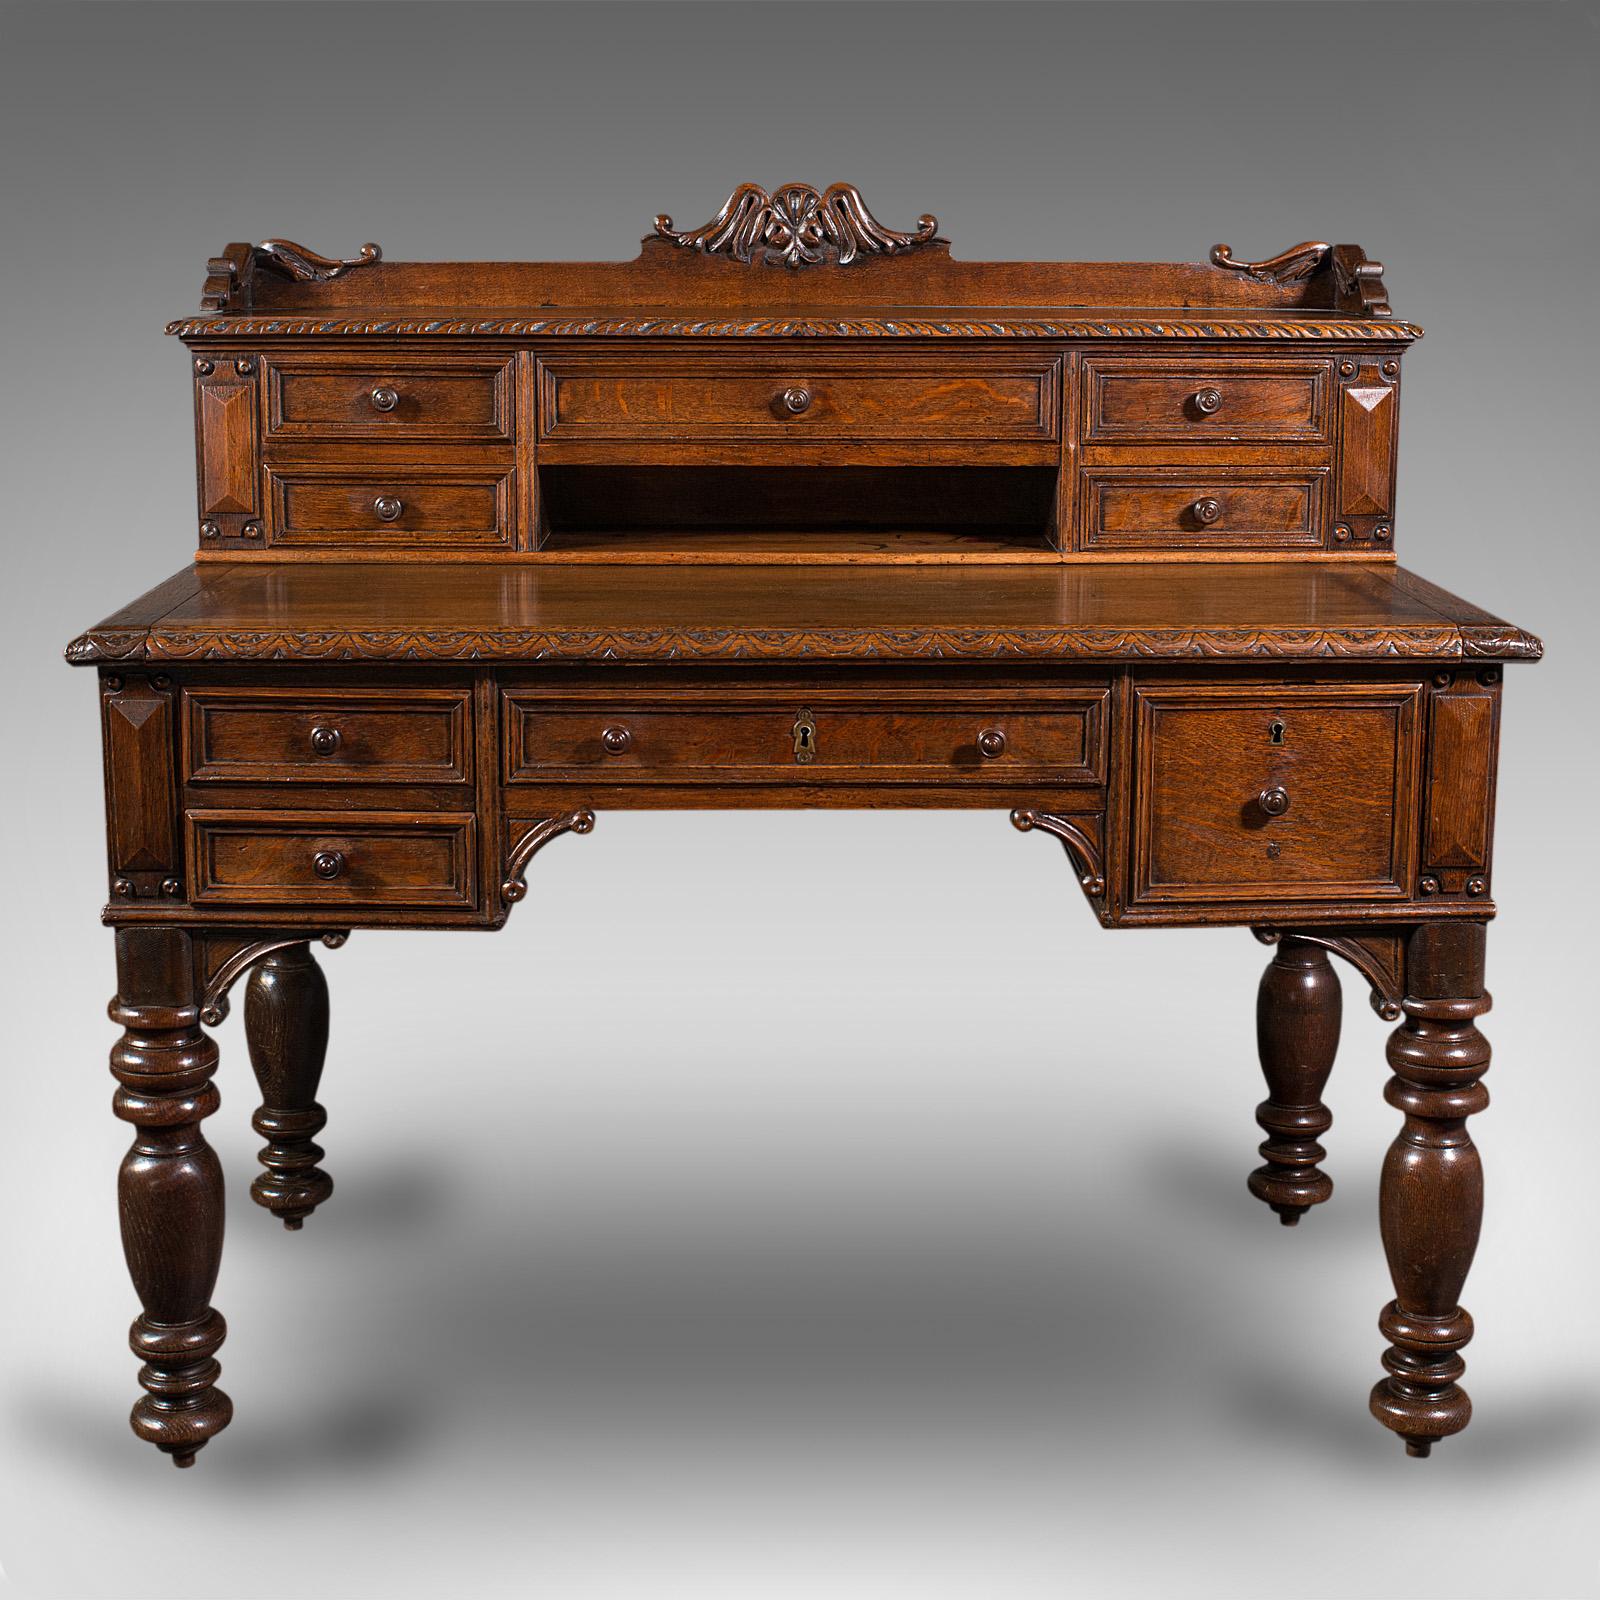 This is an antique carved correspondence desk with hidden drawer. A Scottish, oak writing table, dating to the early Victorian period, circa 1860.

Superior quality desk with delightfully figured stocks and Gothic revival overtones
Displays a